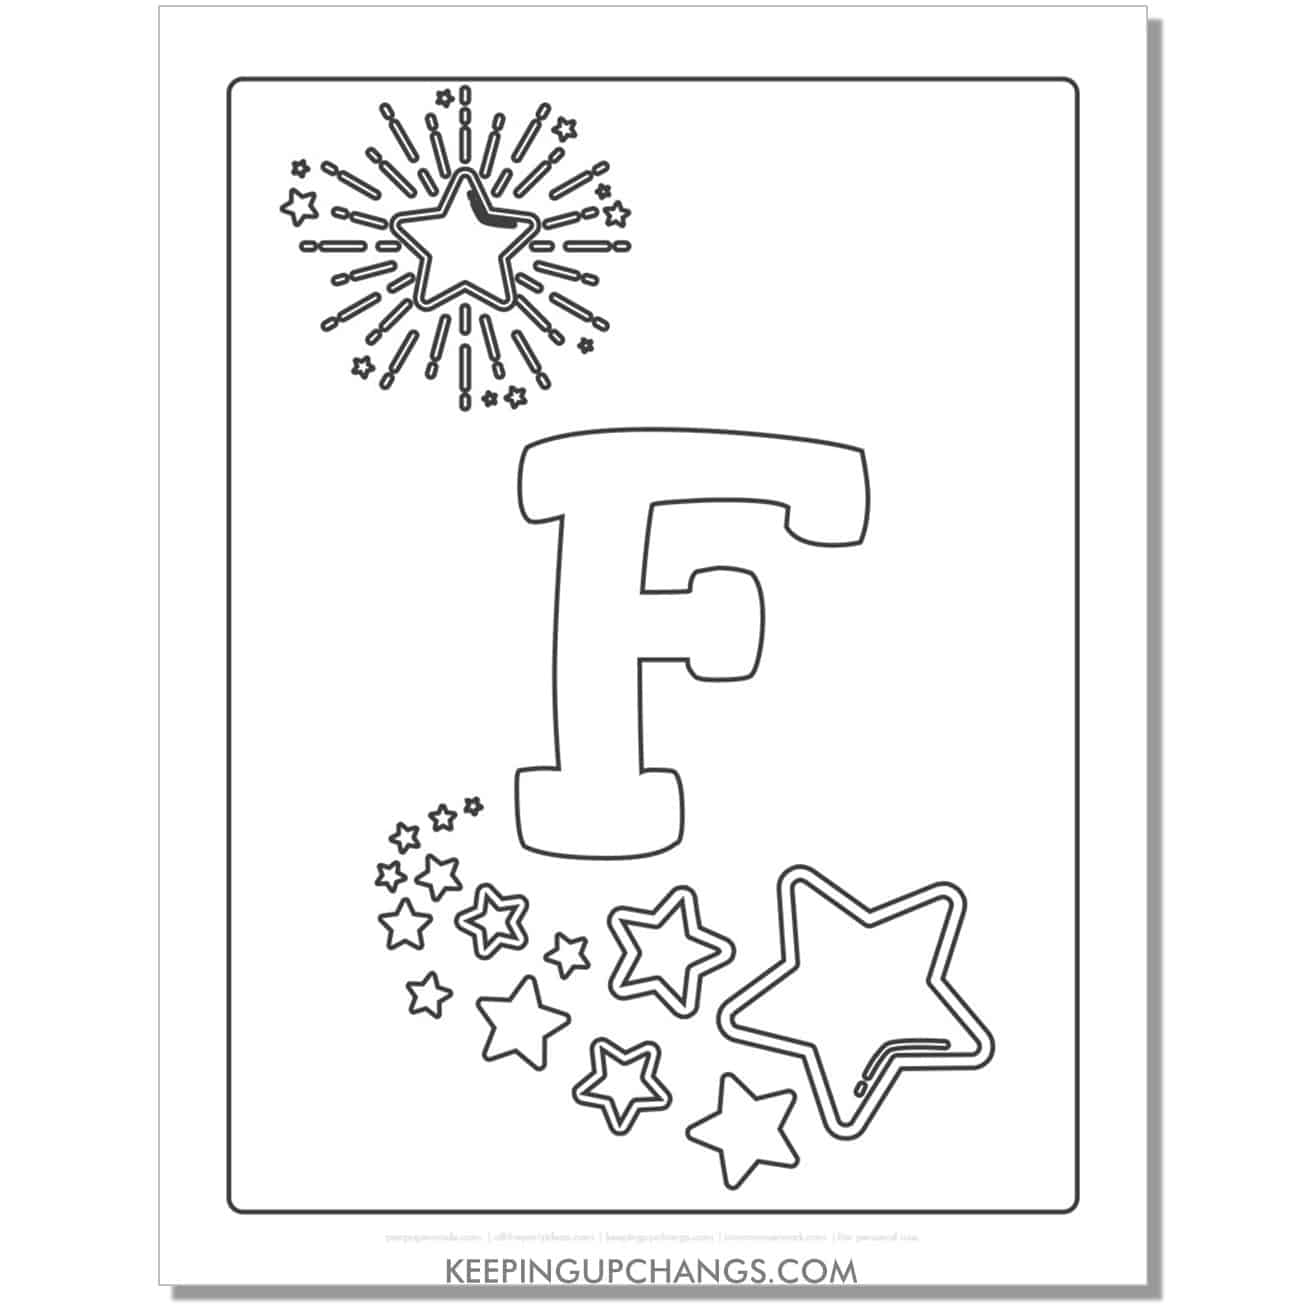 cool letter f to color with stars, space theme.